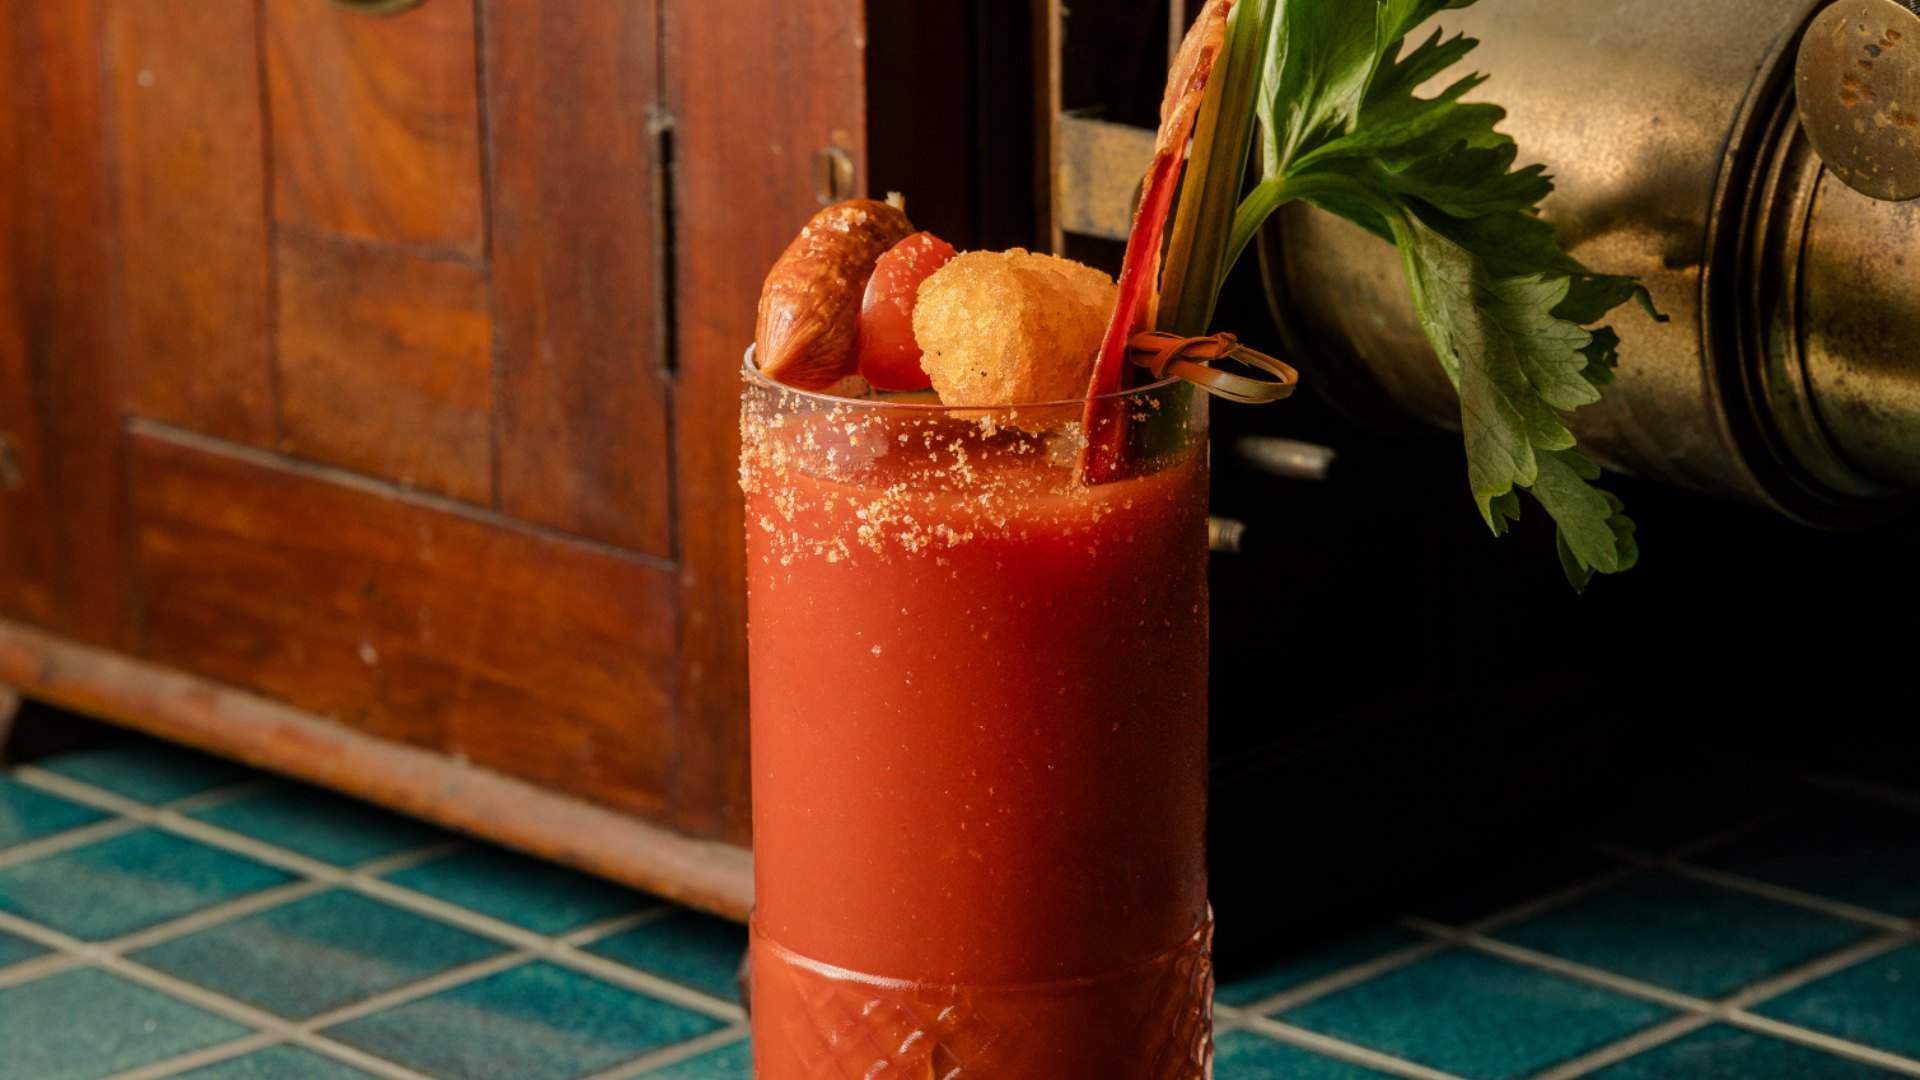 The Viaduct's New London-Themed Pub Has a Cocktail Topped With a Full English Breakfast